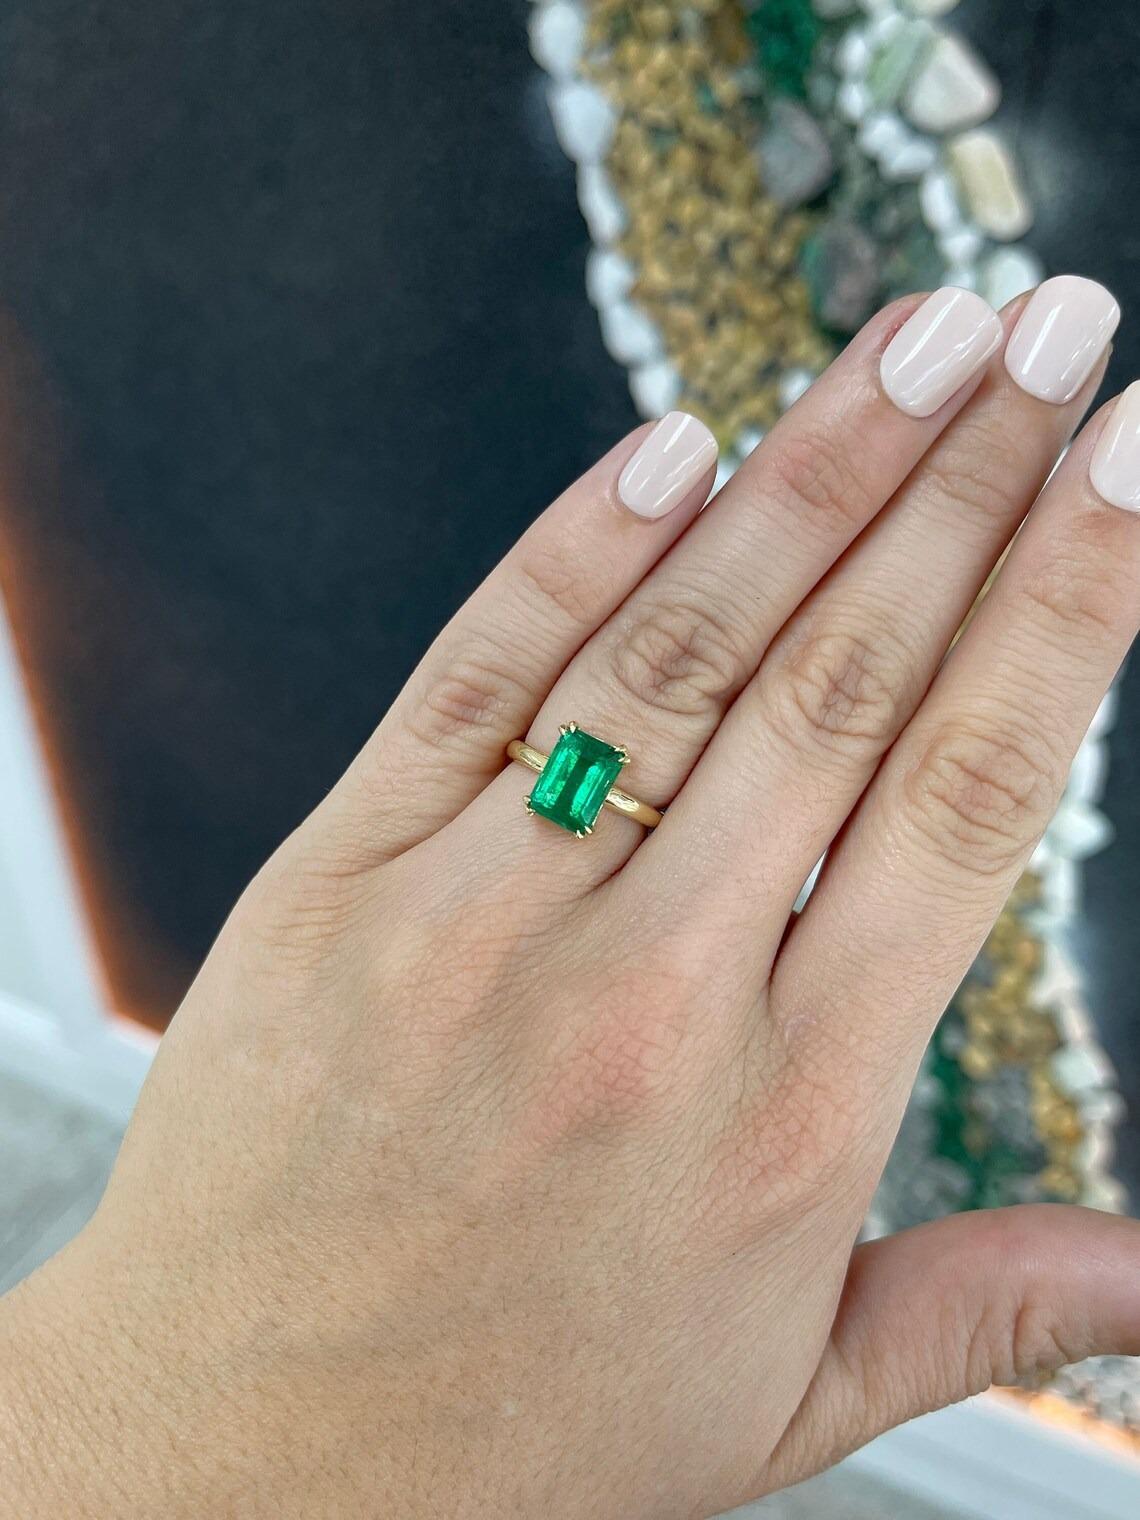 Contemporary 3.05ct AAA Vivid Green Zambian Emerald Cut Emerald Solitaire Prong Set Gold Ring For Sale